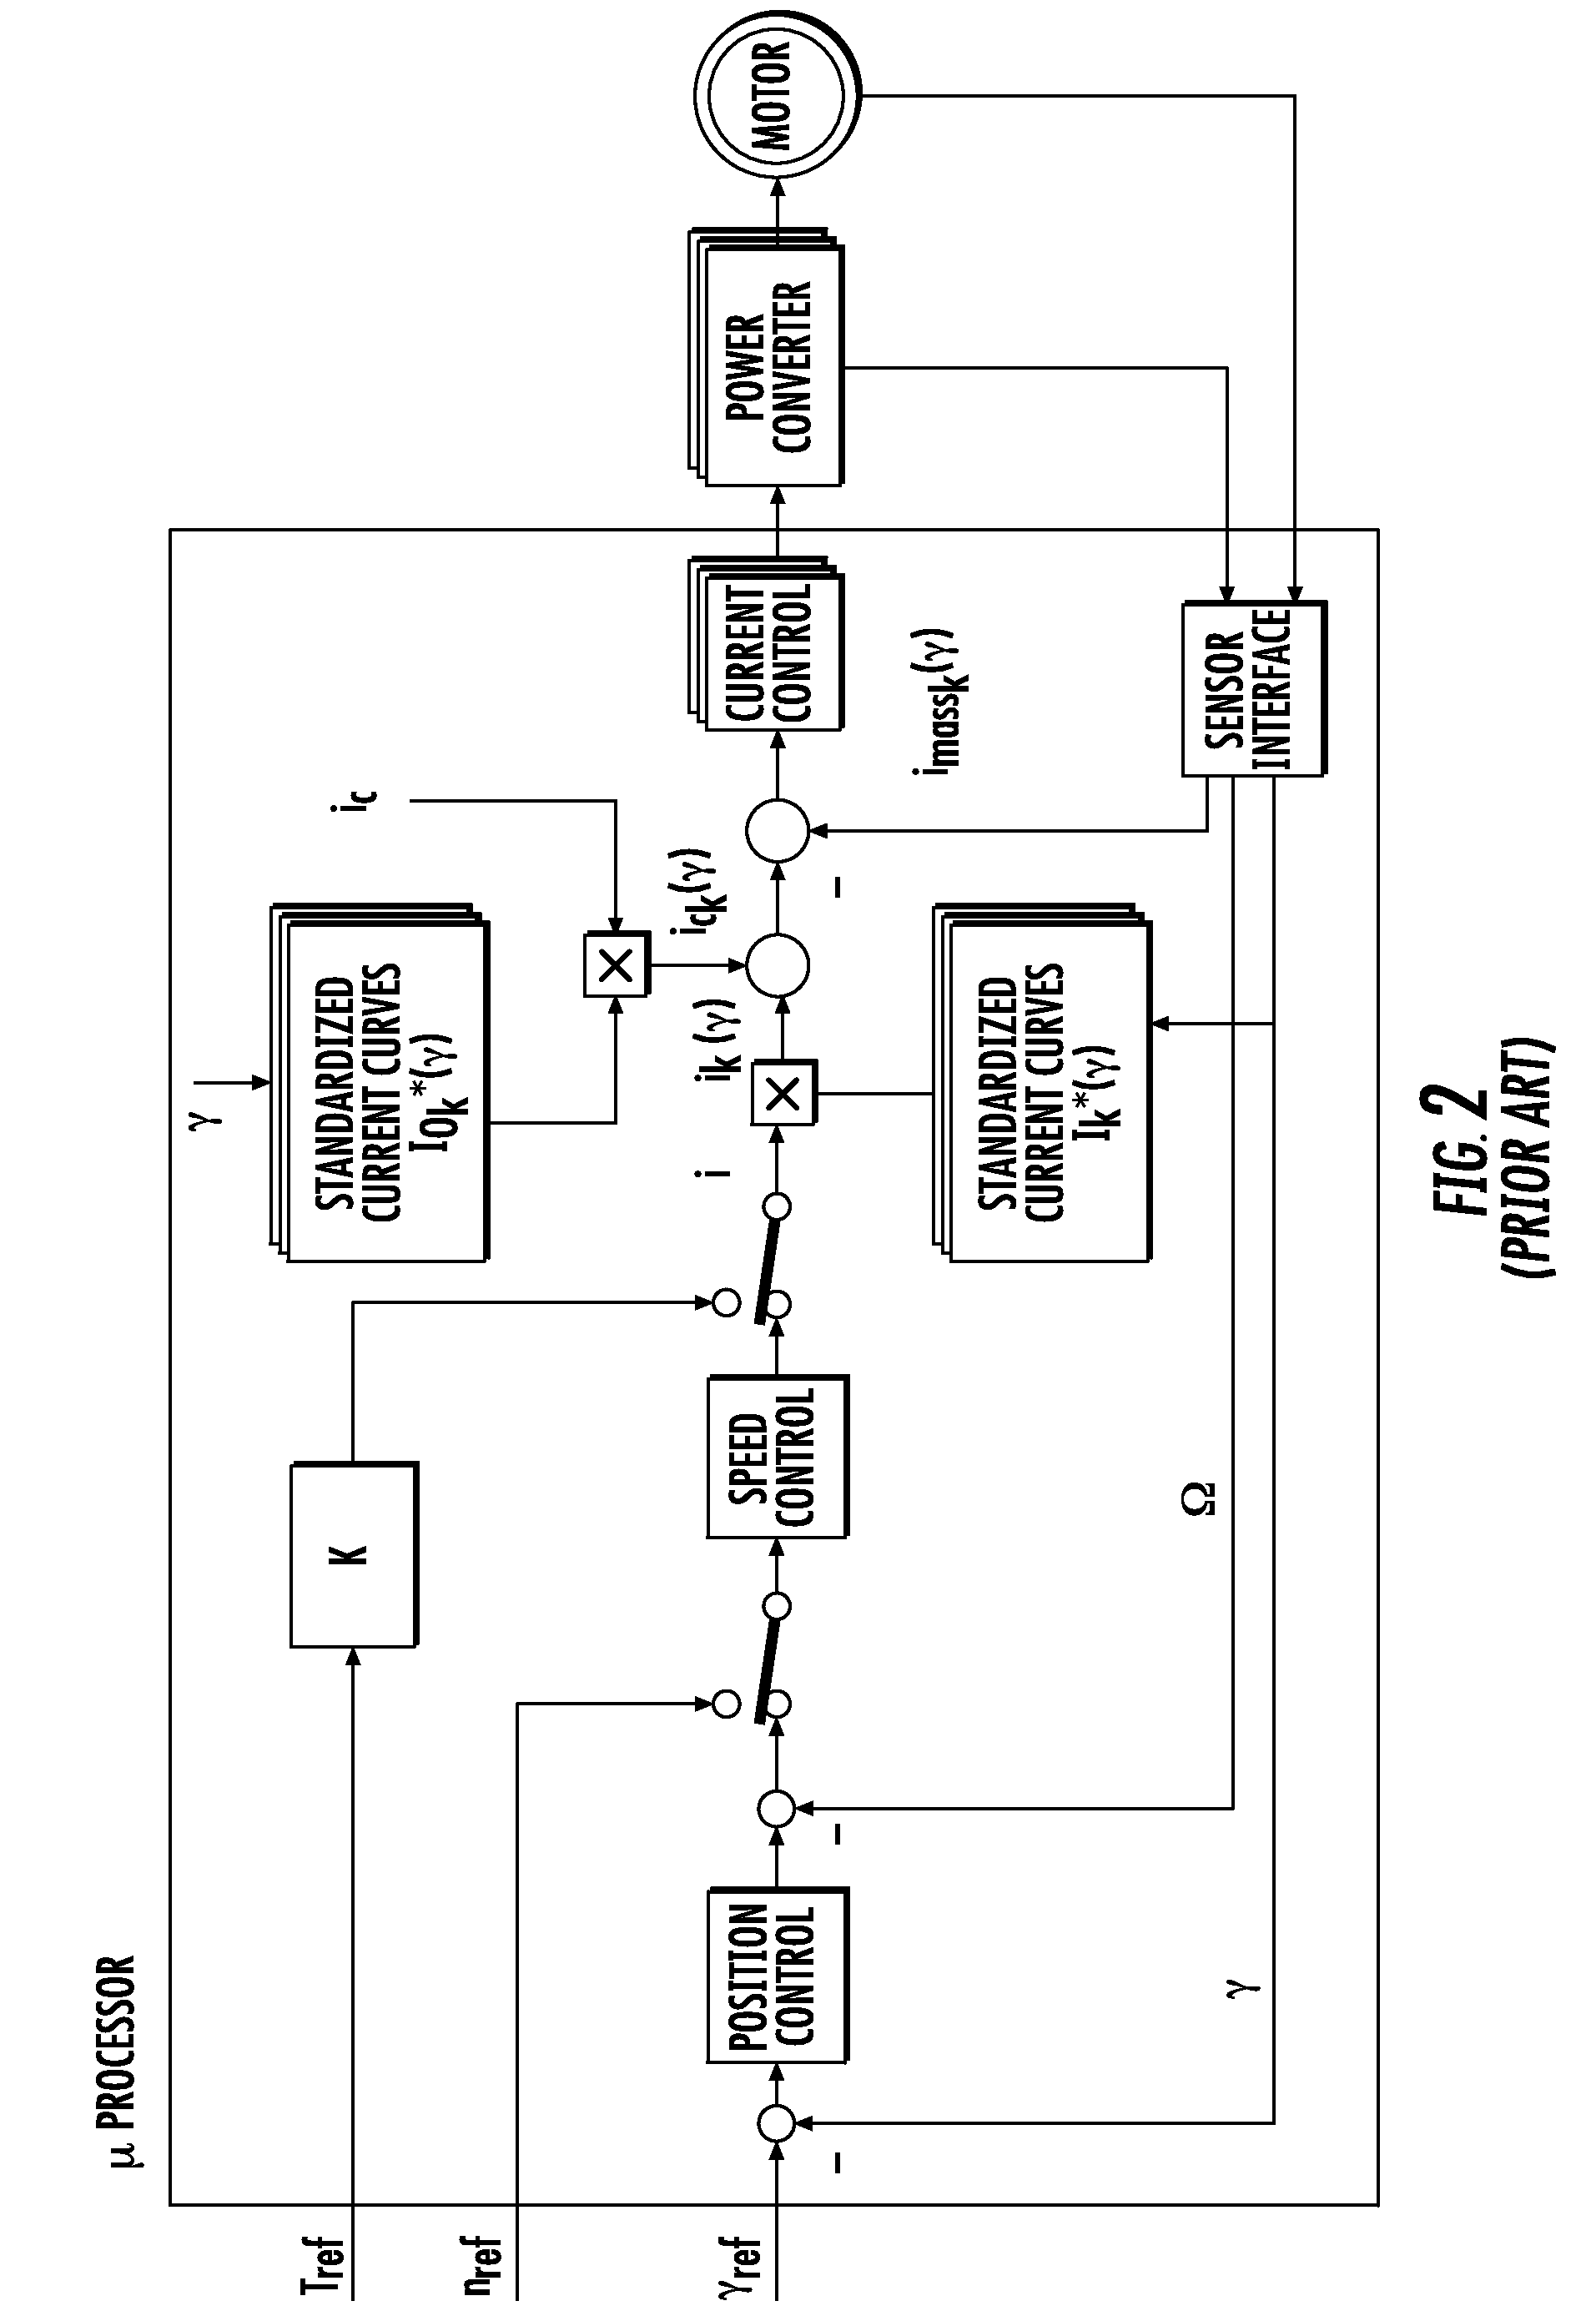 Method of controlling a three-phase permanent magnet synchronous motor for reducing acoustic noise